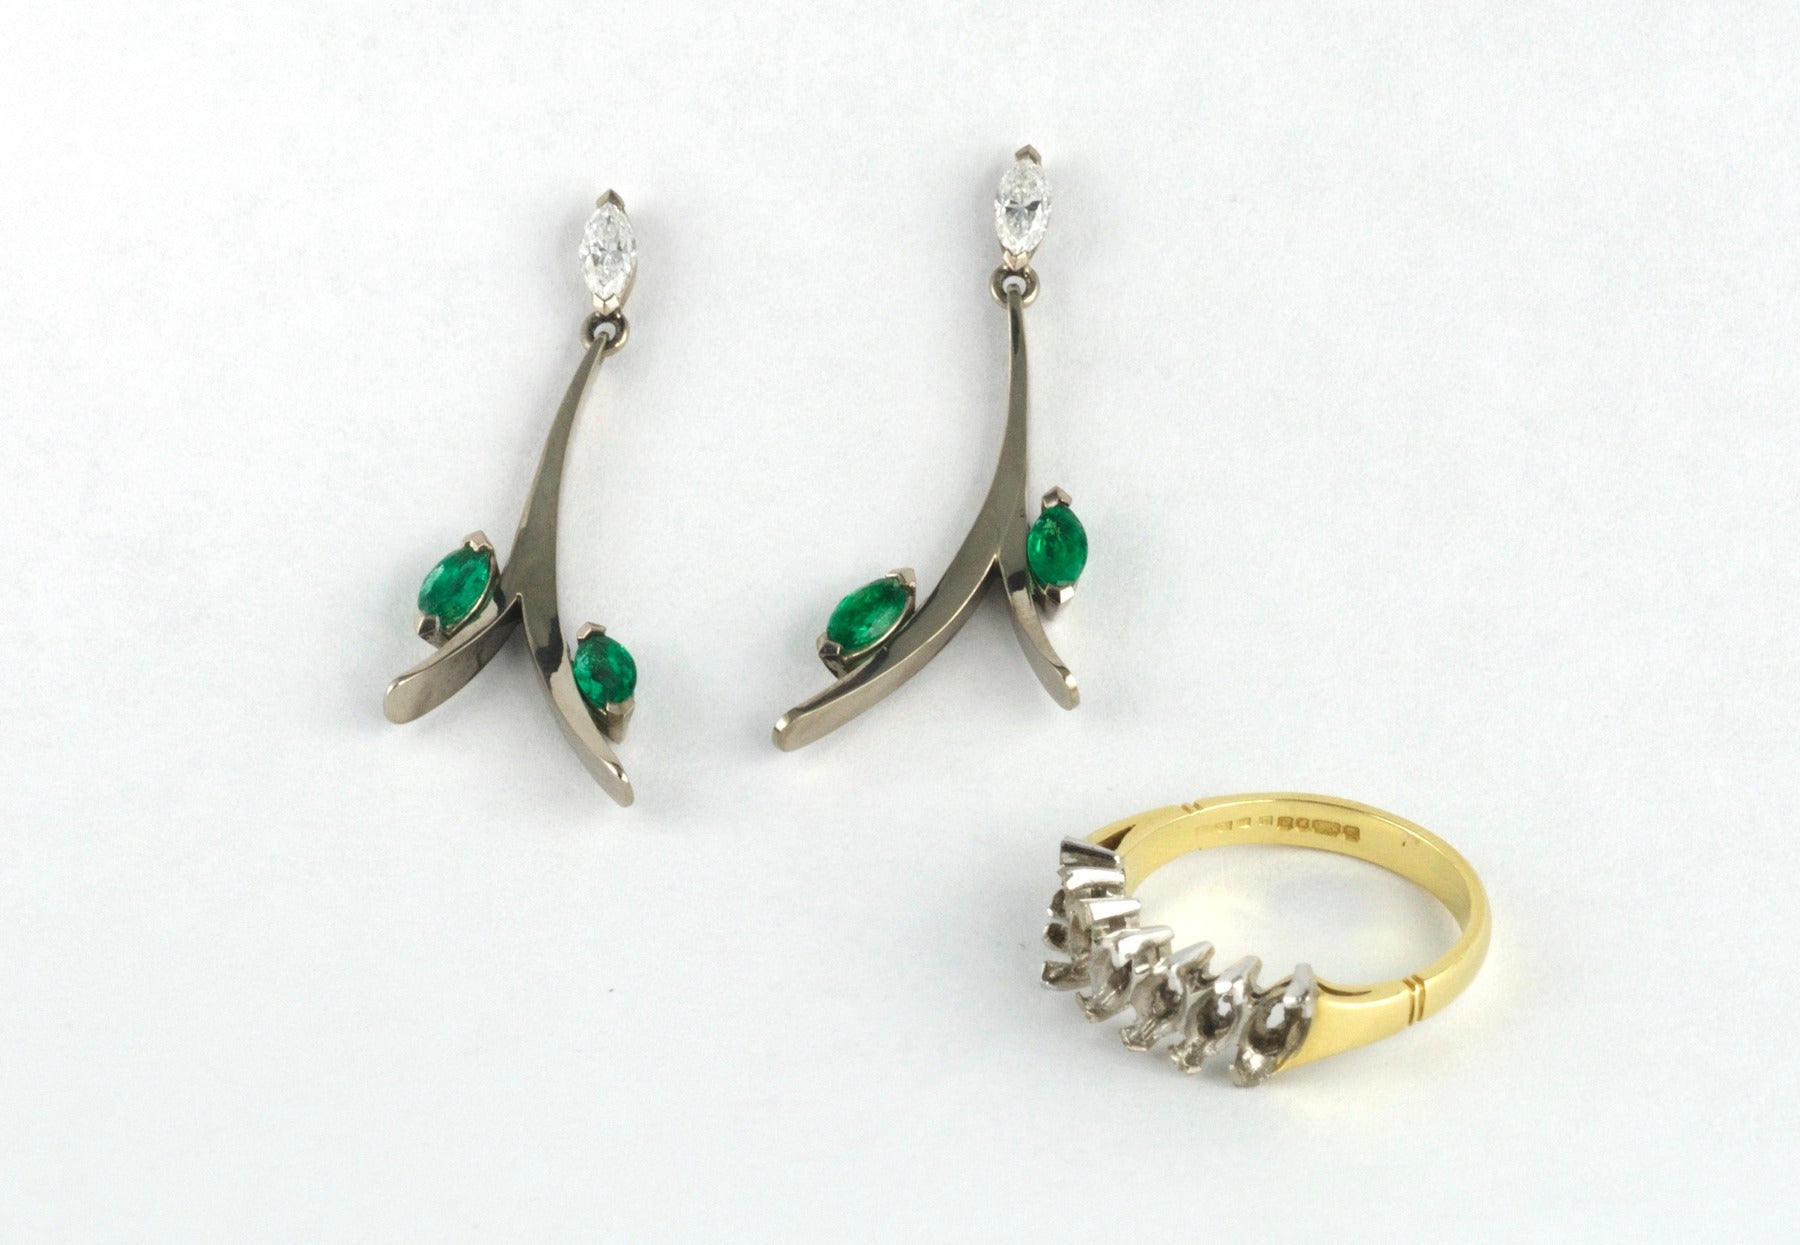 Forged white gold, emerald and diamond earrings